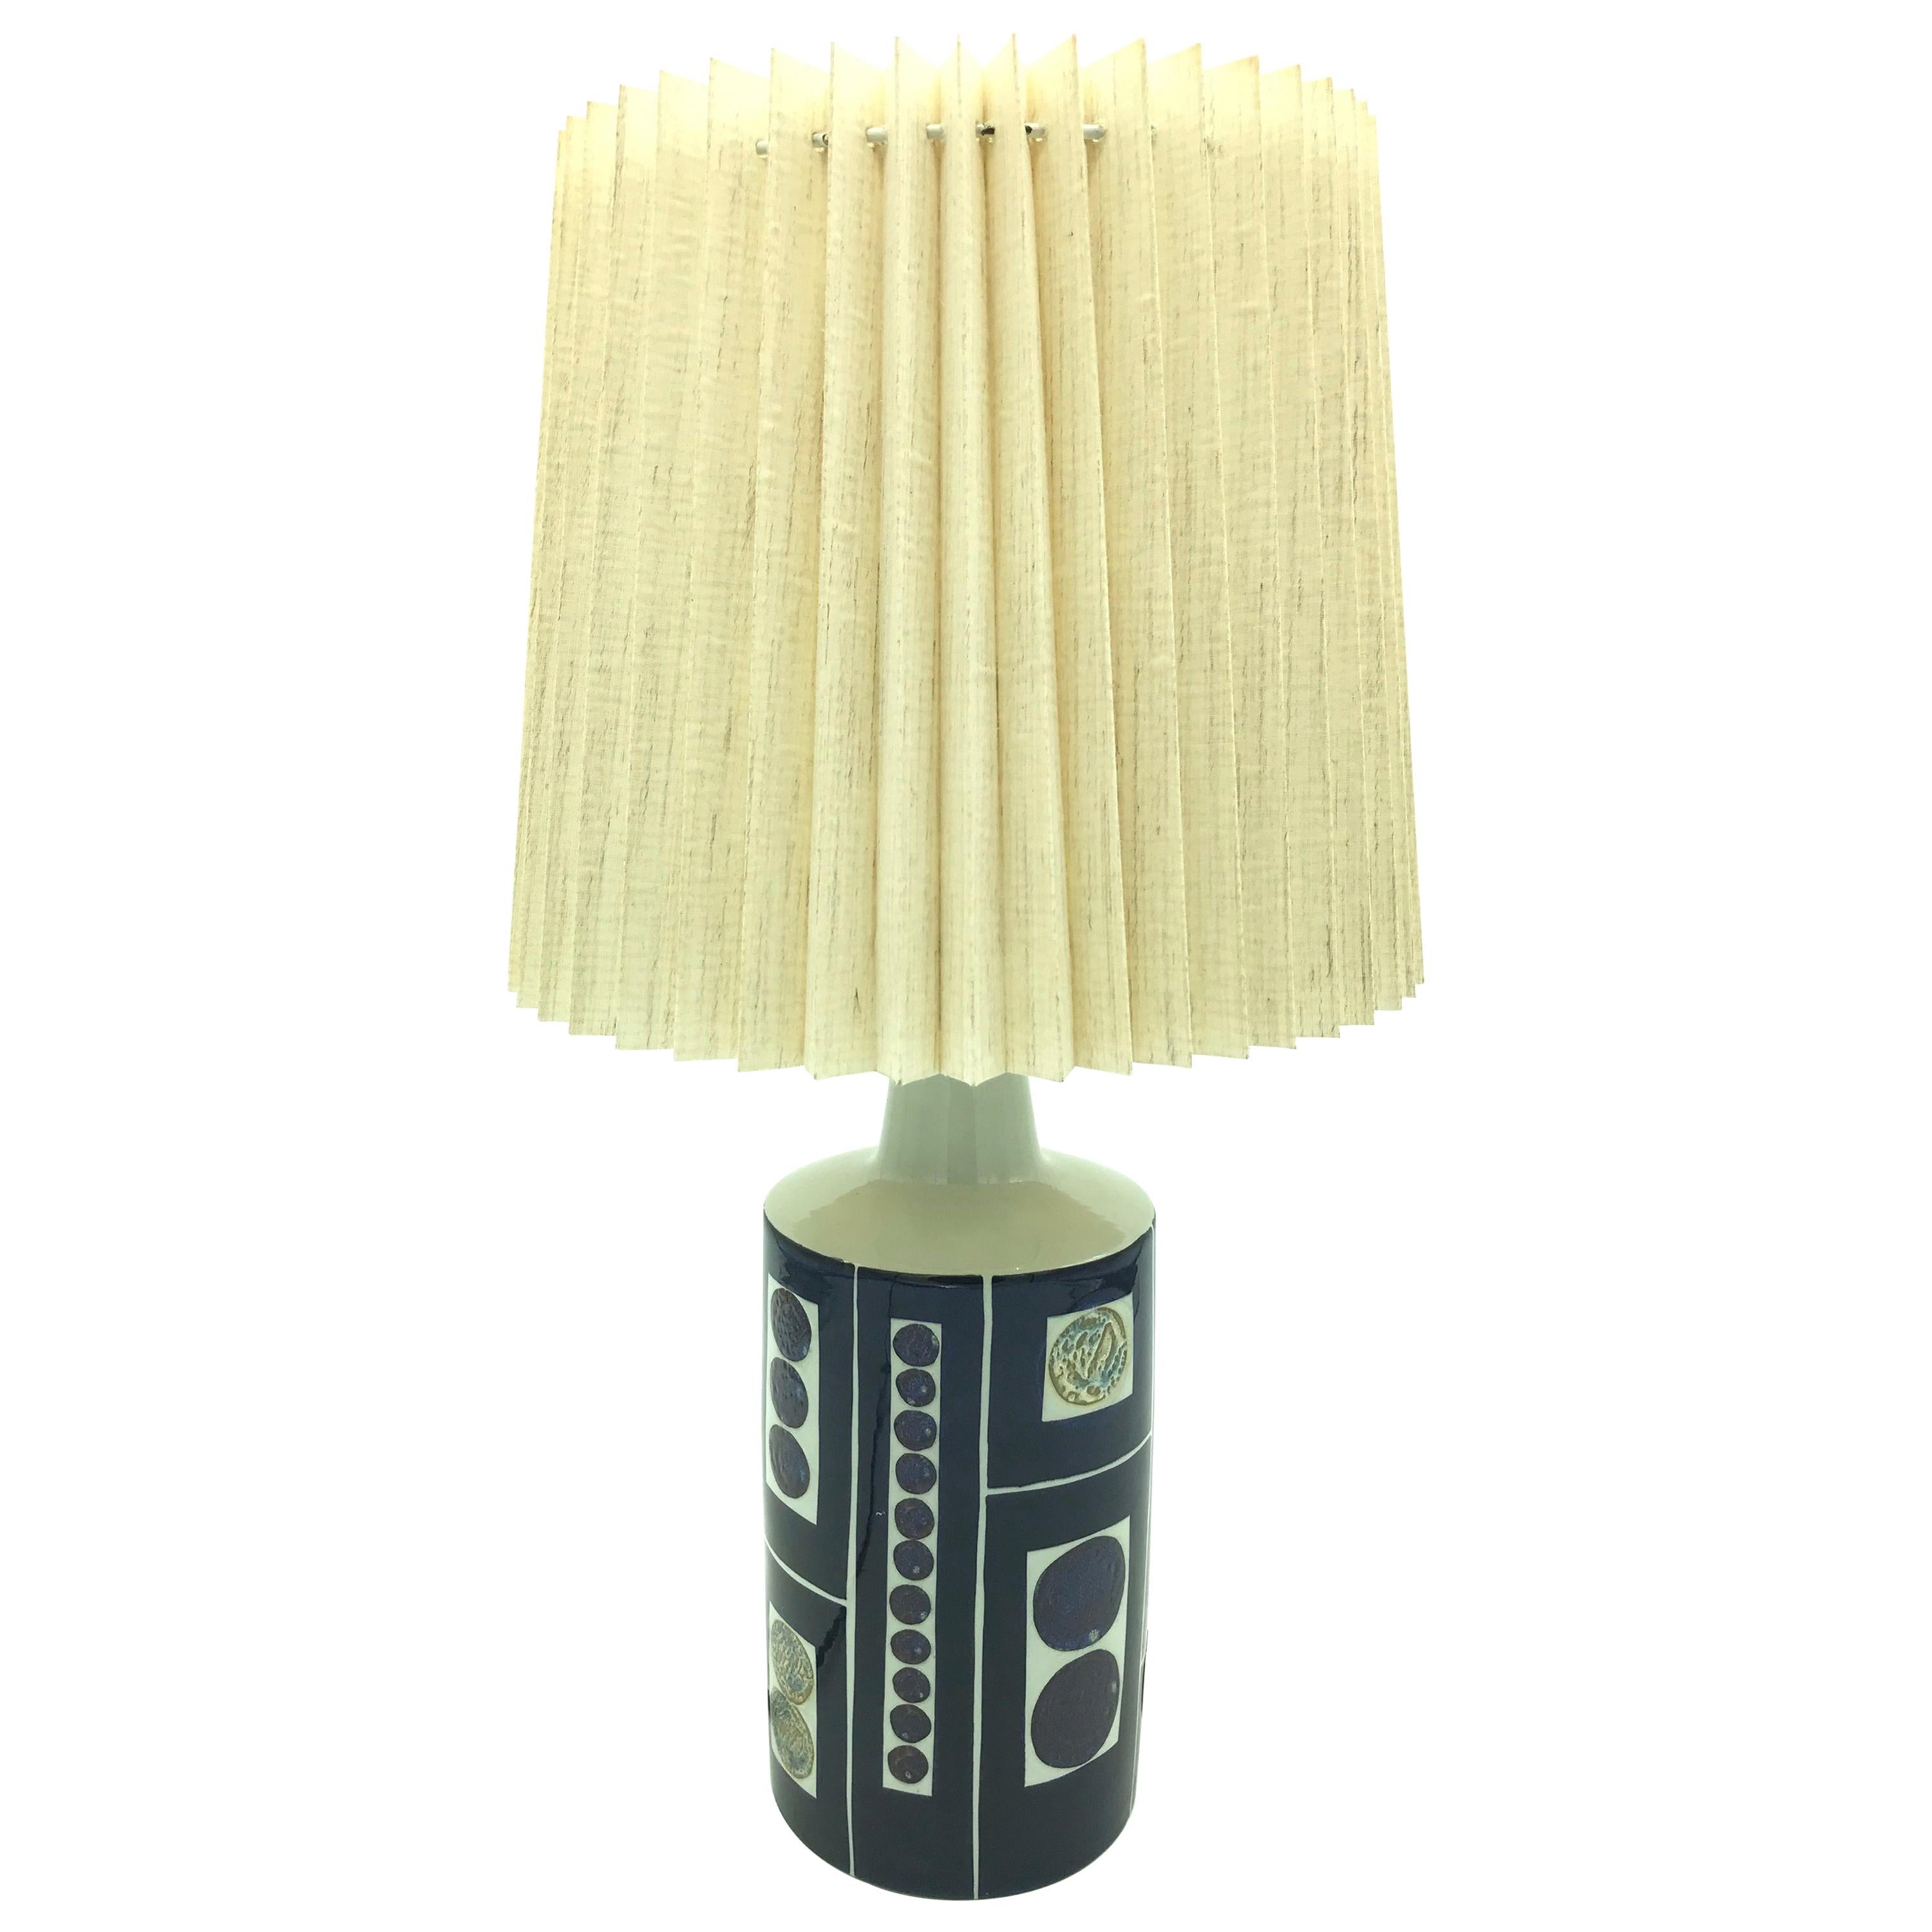 Gorgeous Midcentury Pottery Table Lamp by Fog & Mørup For Sale